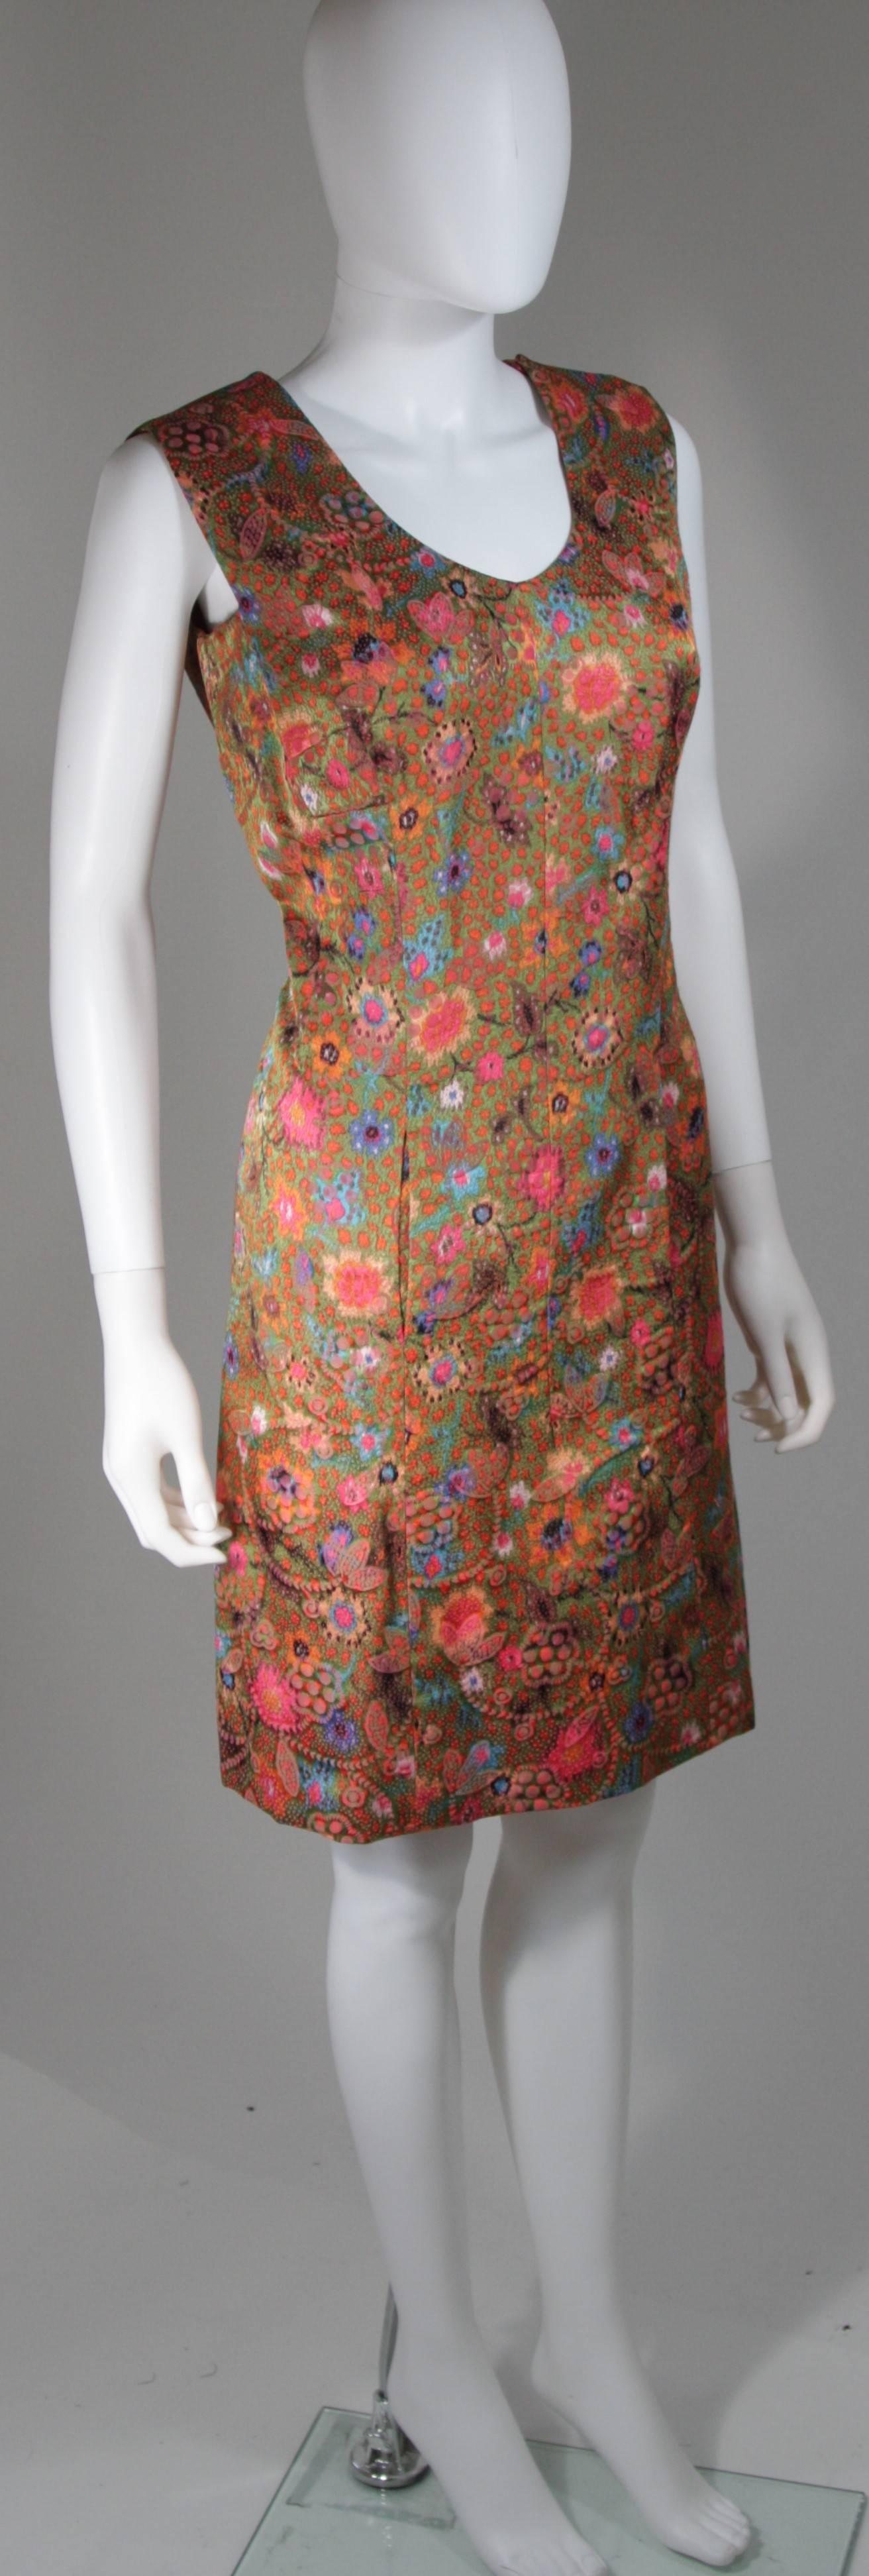 Galanos Floral Print Shift Dress with Pockets Size Small Medium In Excellent Condition For Sale In Los Angeles, CA